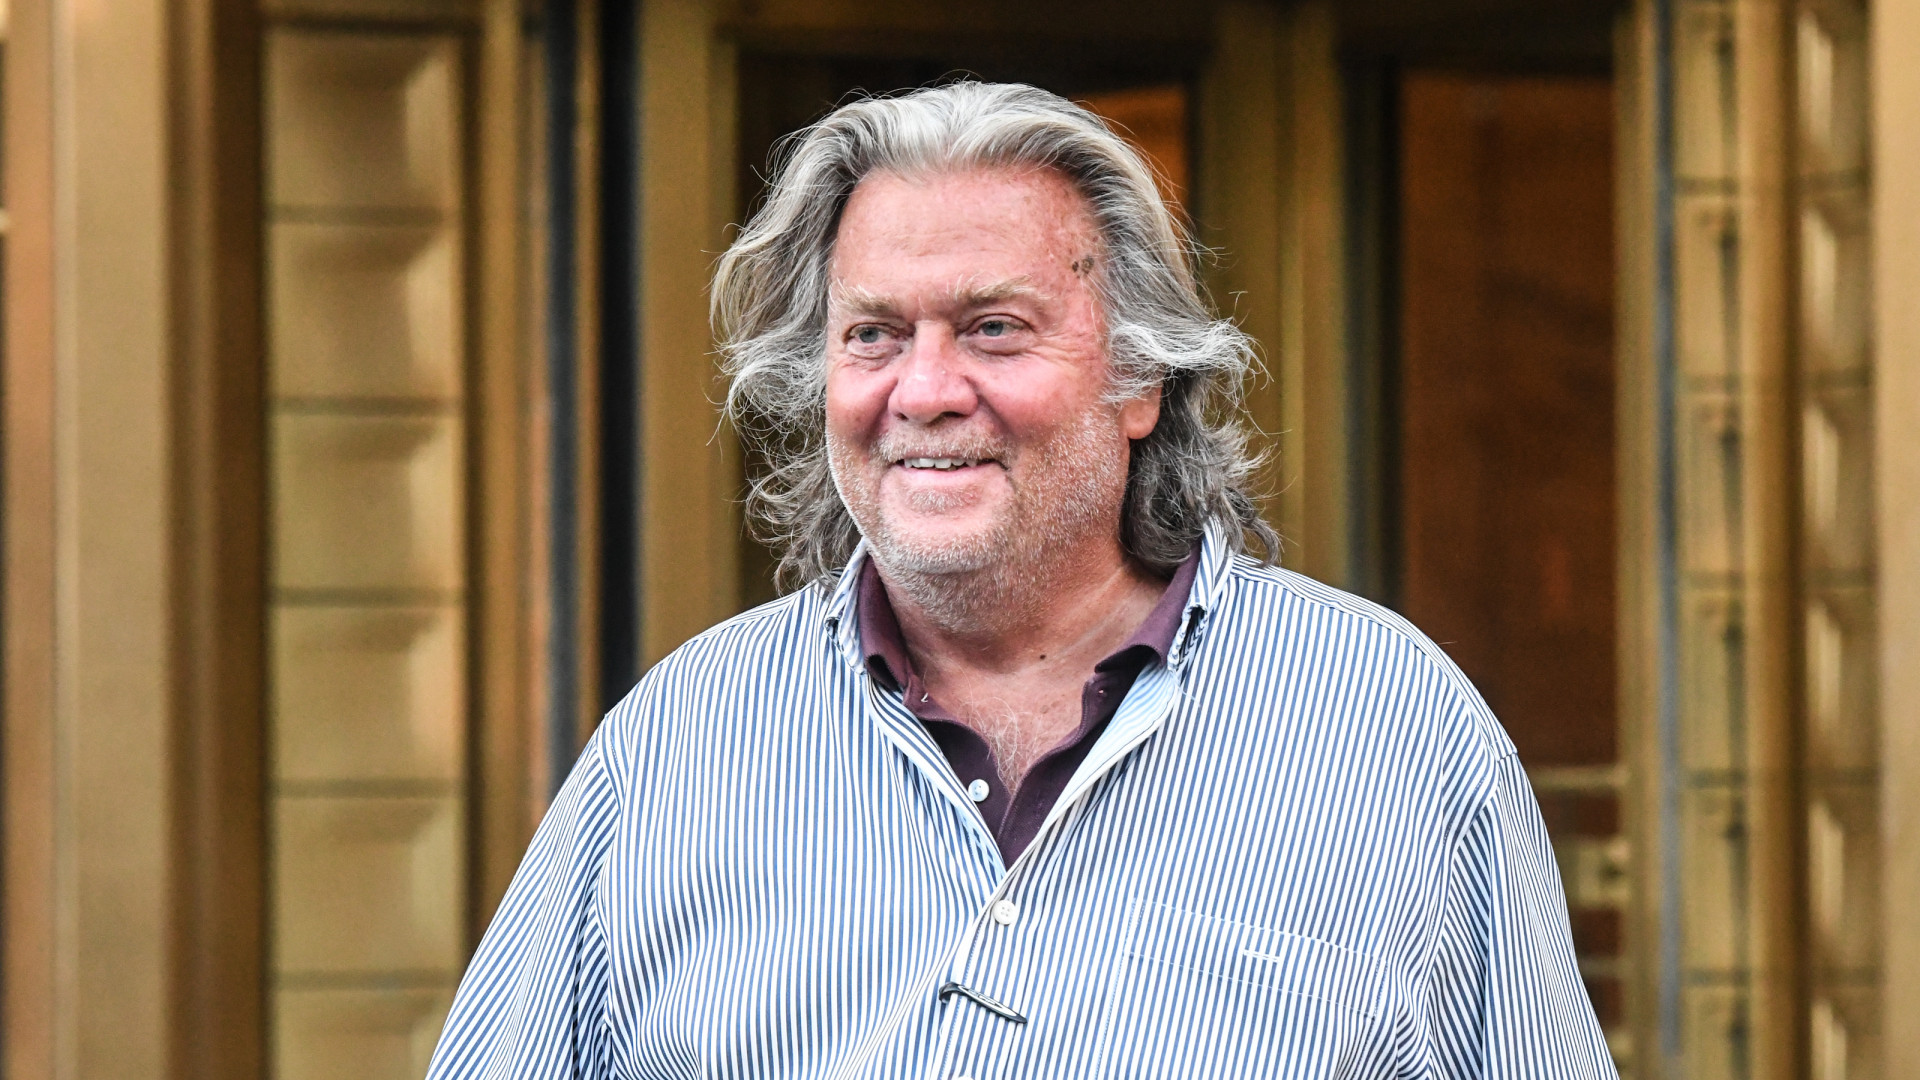 Steve Bannon, Trump strategist, accused of refusing to testify at Capitol robbery trial |  Univision Political News